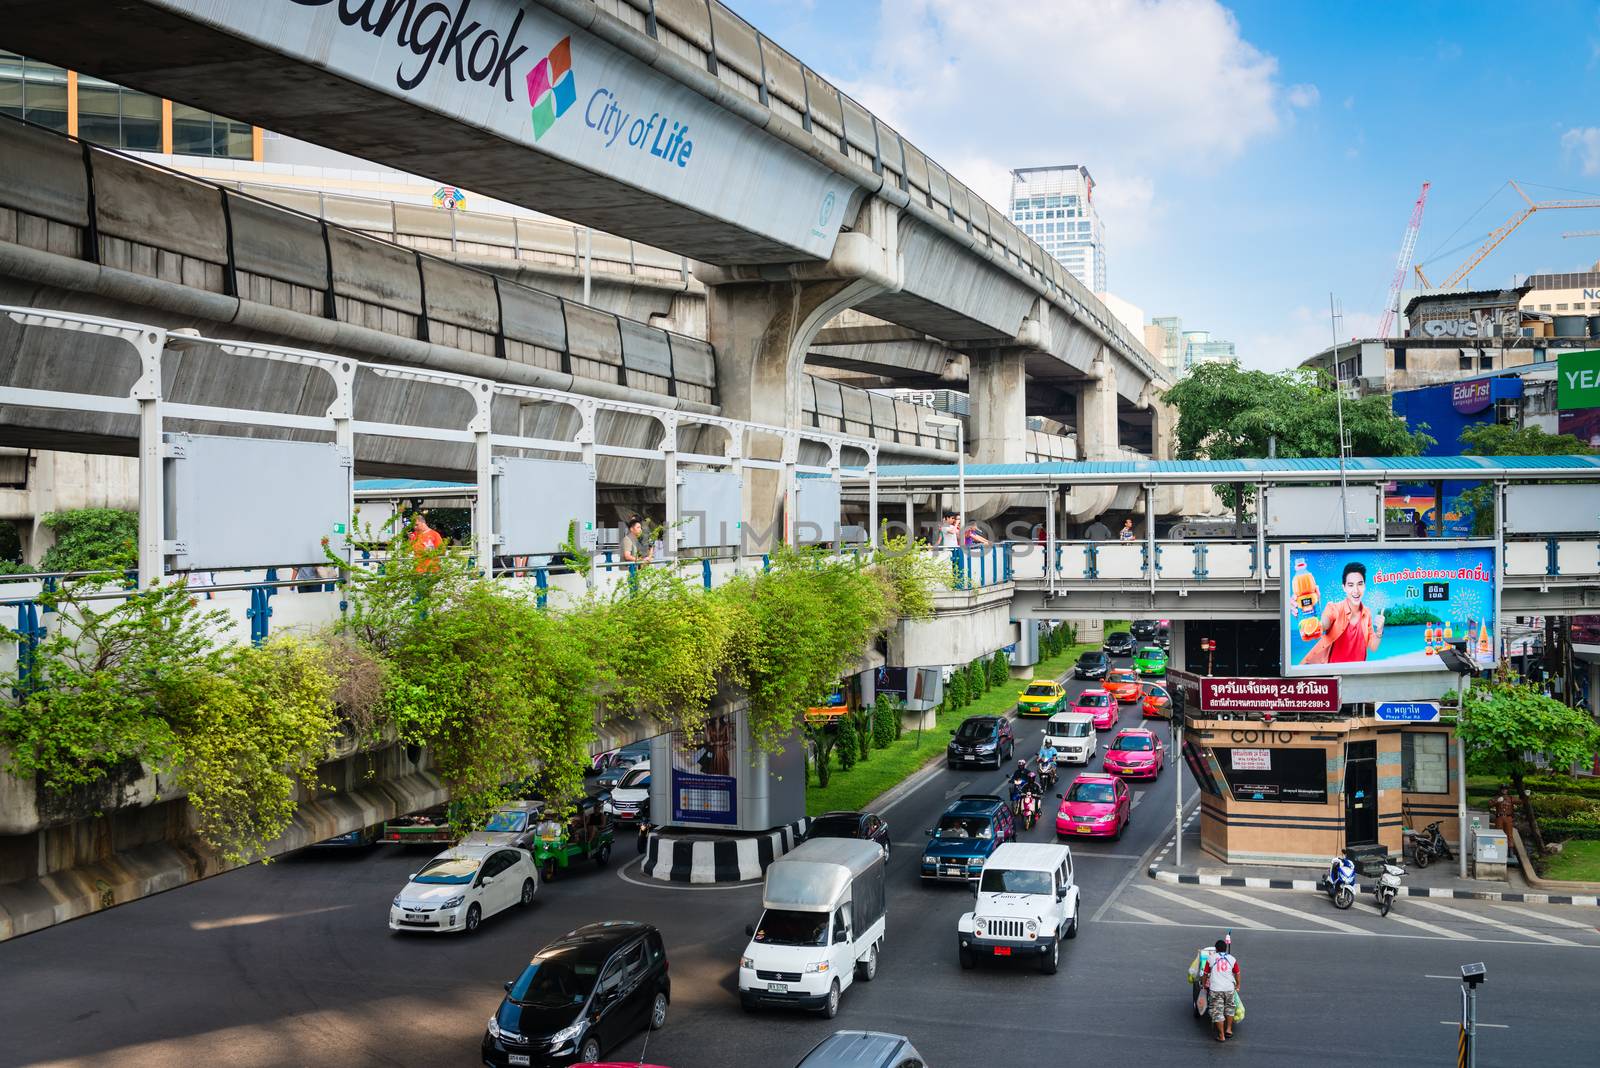 BANGKOK, THAILAND - 21 NOV 2013: Motorbikes and cars traffic move on road with pedestrian and skytrain tracks above street